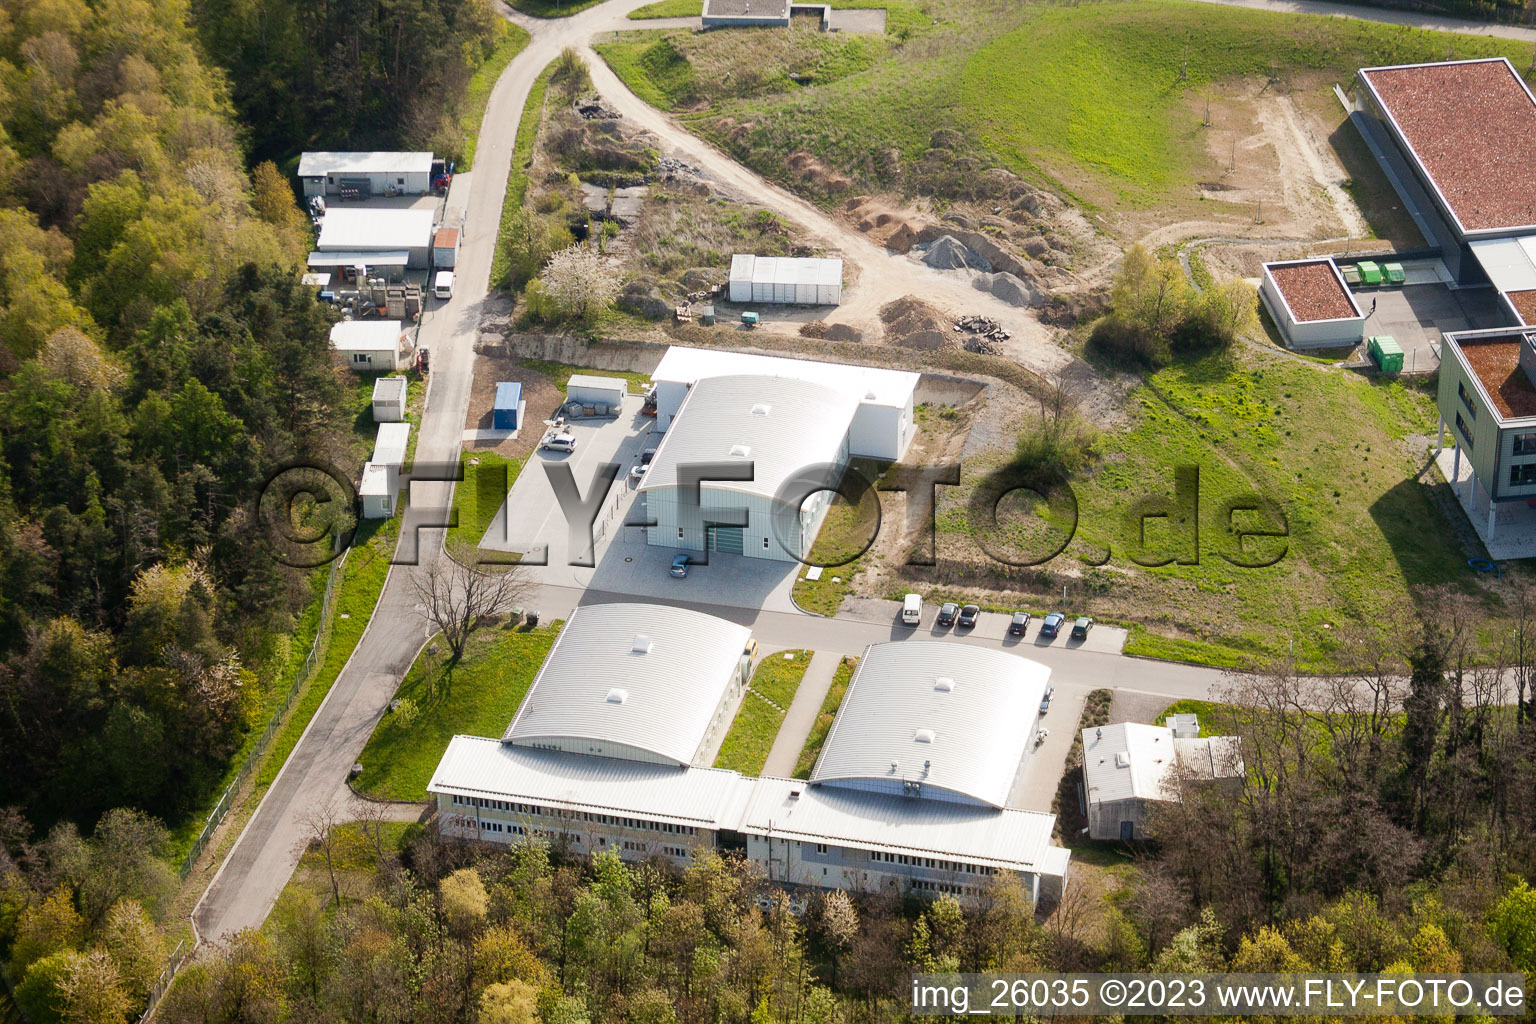 Pfinztal, Fraunhofer Institute for Chemical Technology (ICT) in the district Grötzingen in Karlsruhe in the state Baden-Wuerttemberg, Germany from the drone perspective